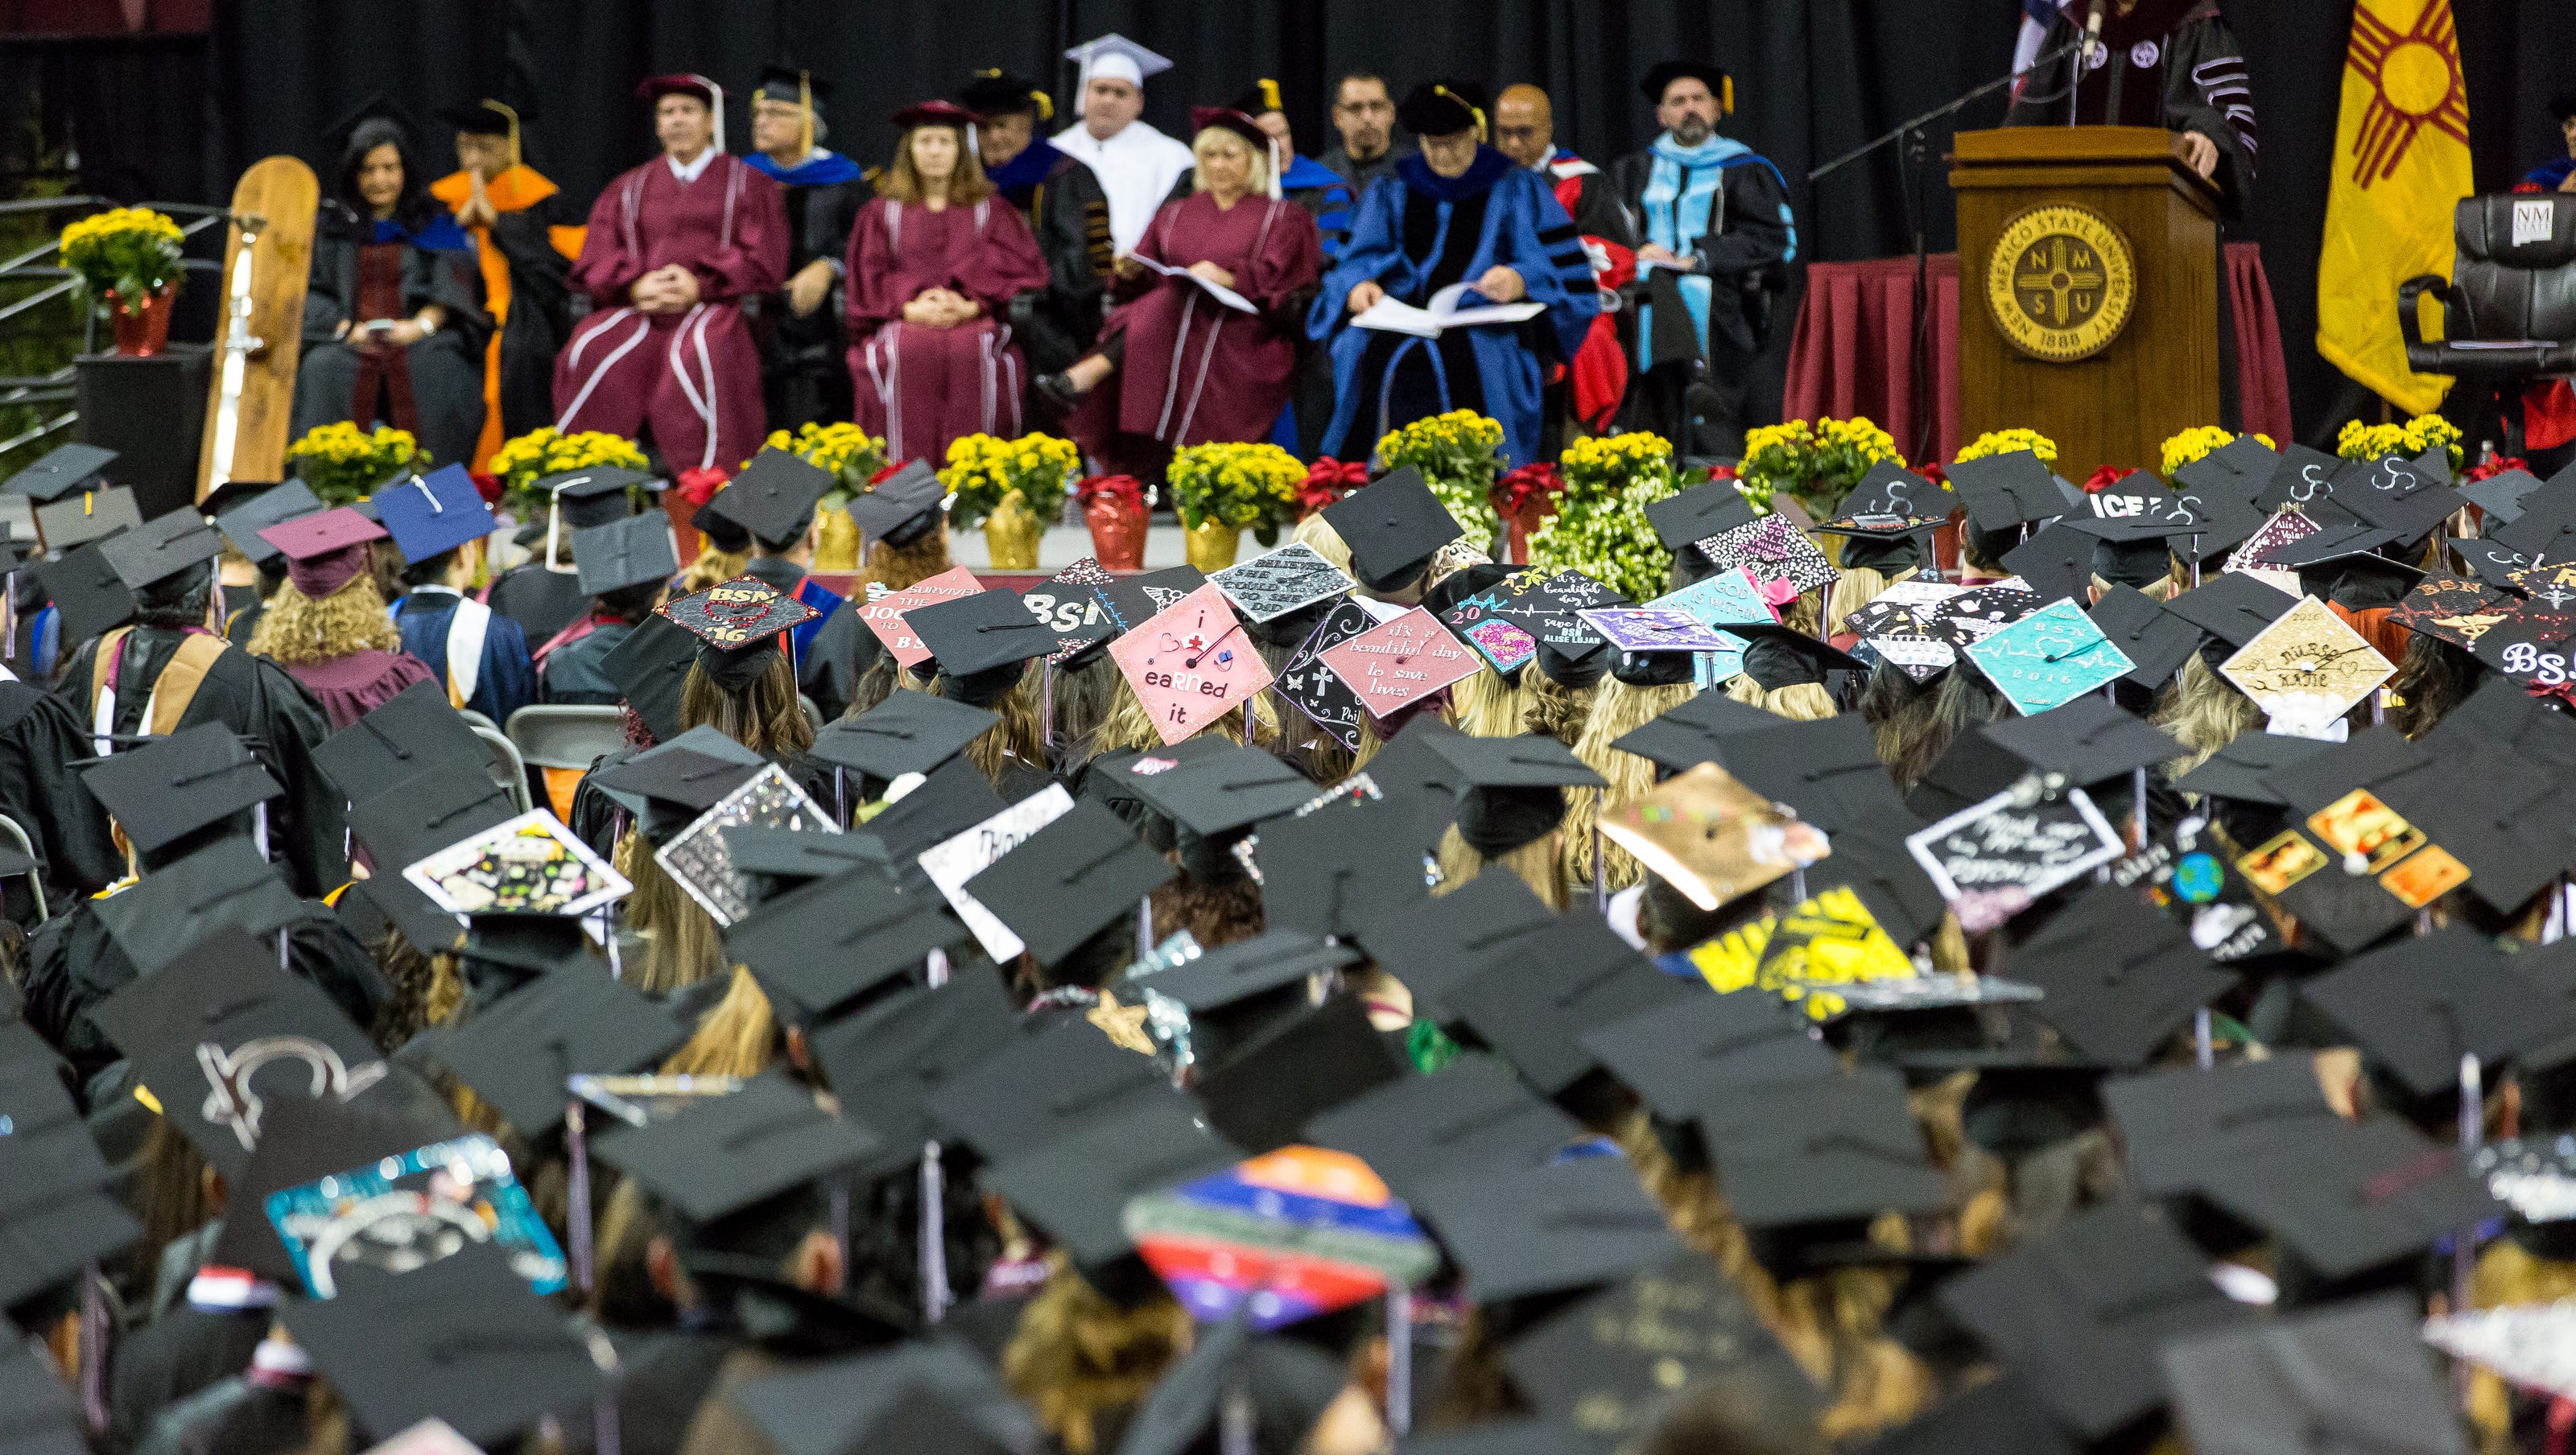 More than 1,000 graduates expected to attend NMSU’s fall commencement